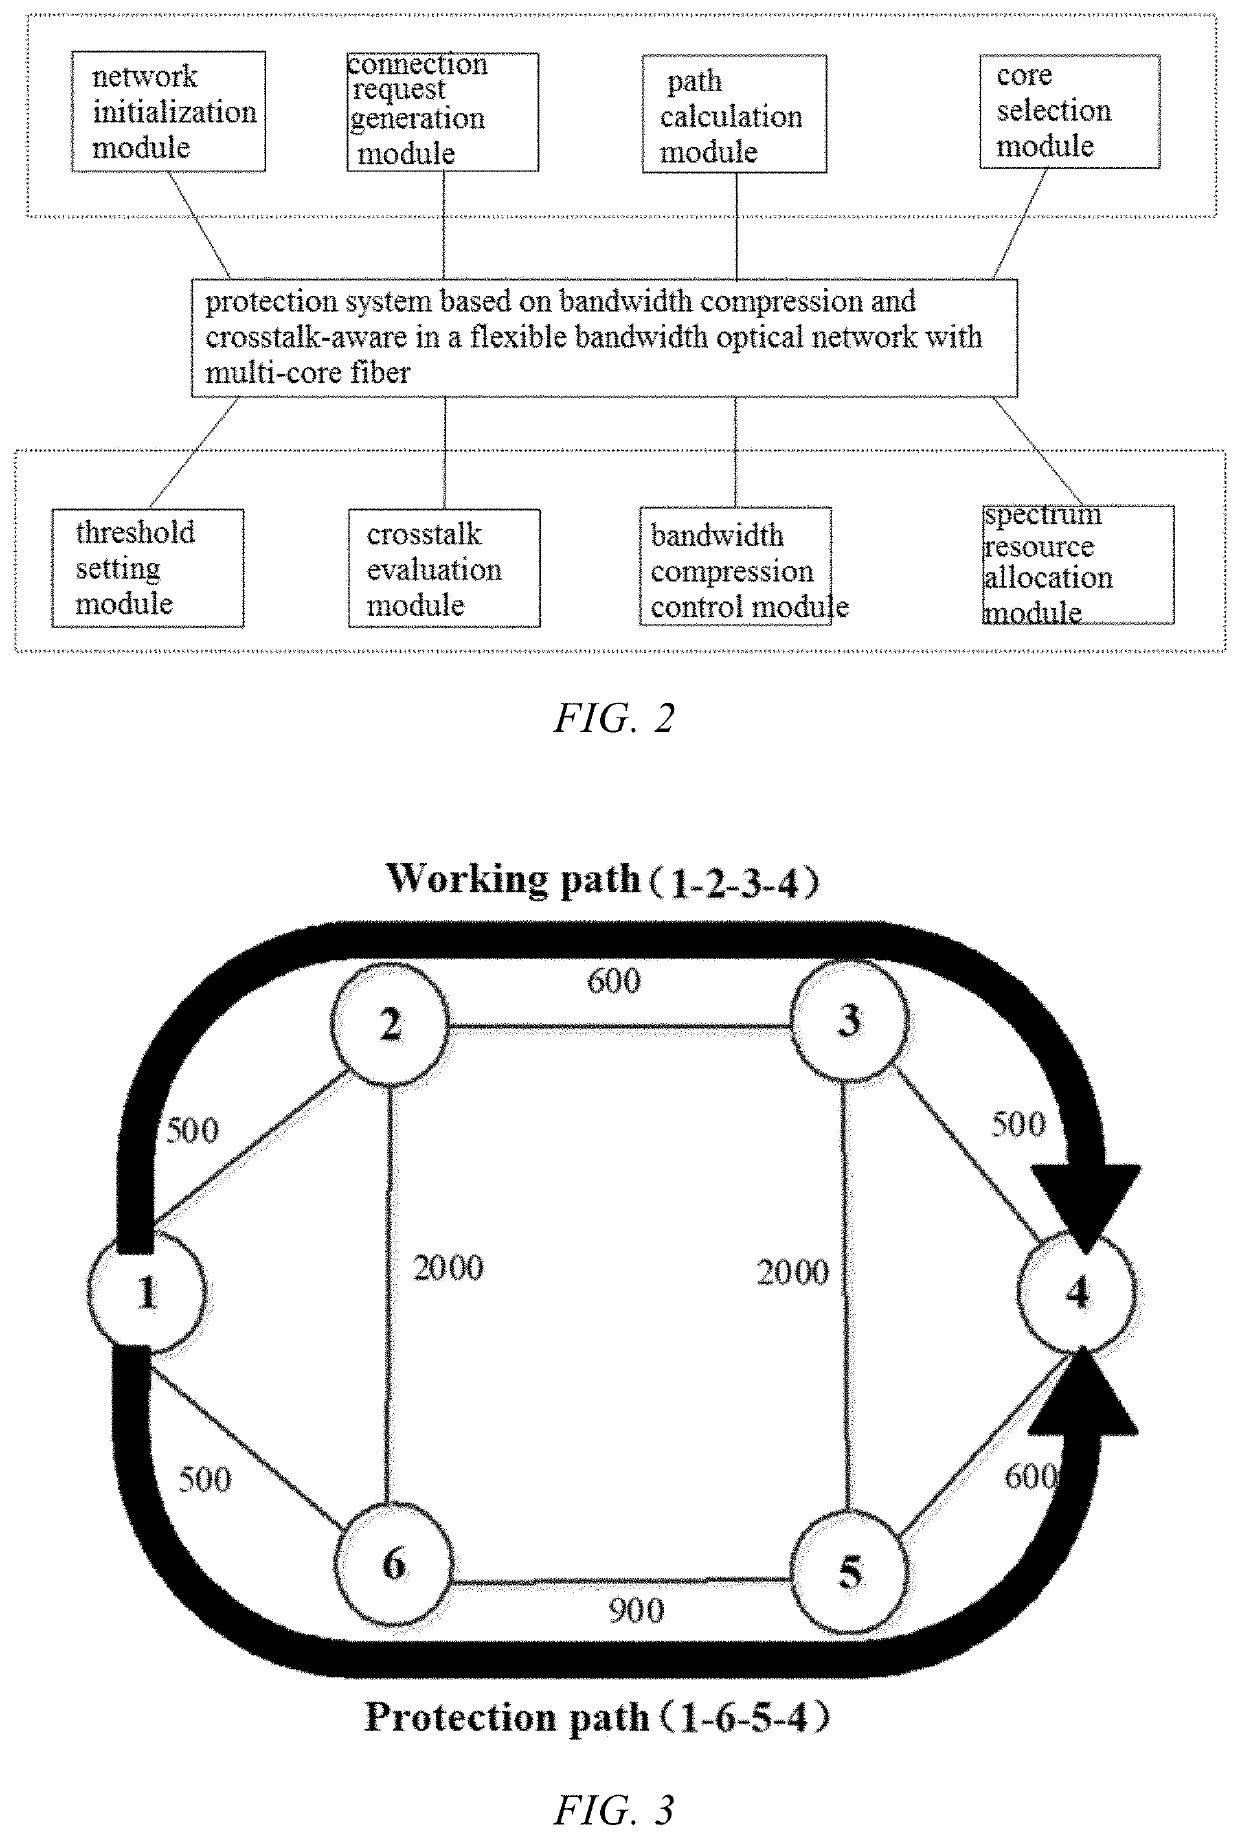 Protection method and system in flexible bandwidth optical networks with multi-core fiber